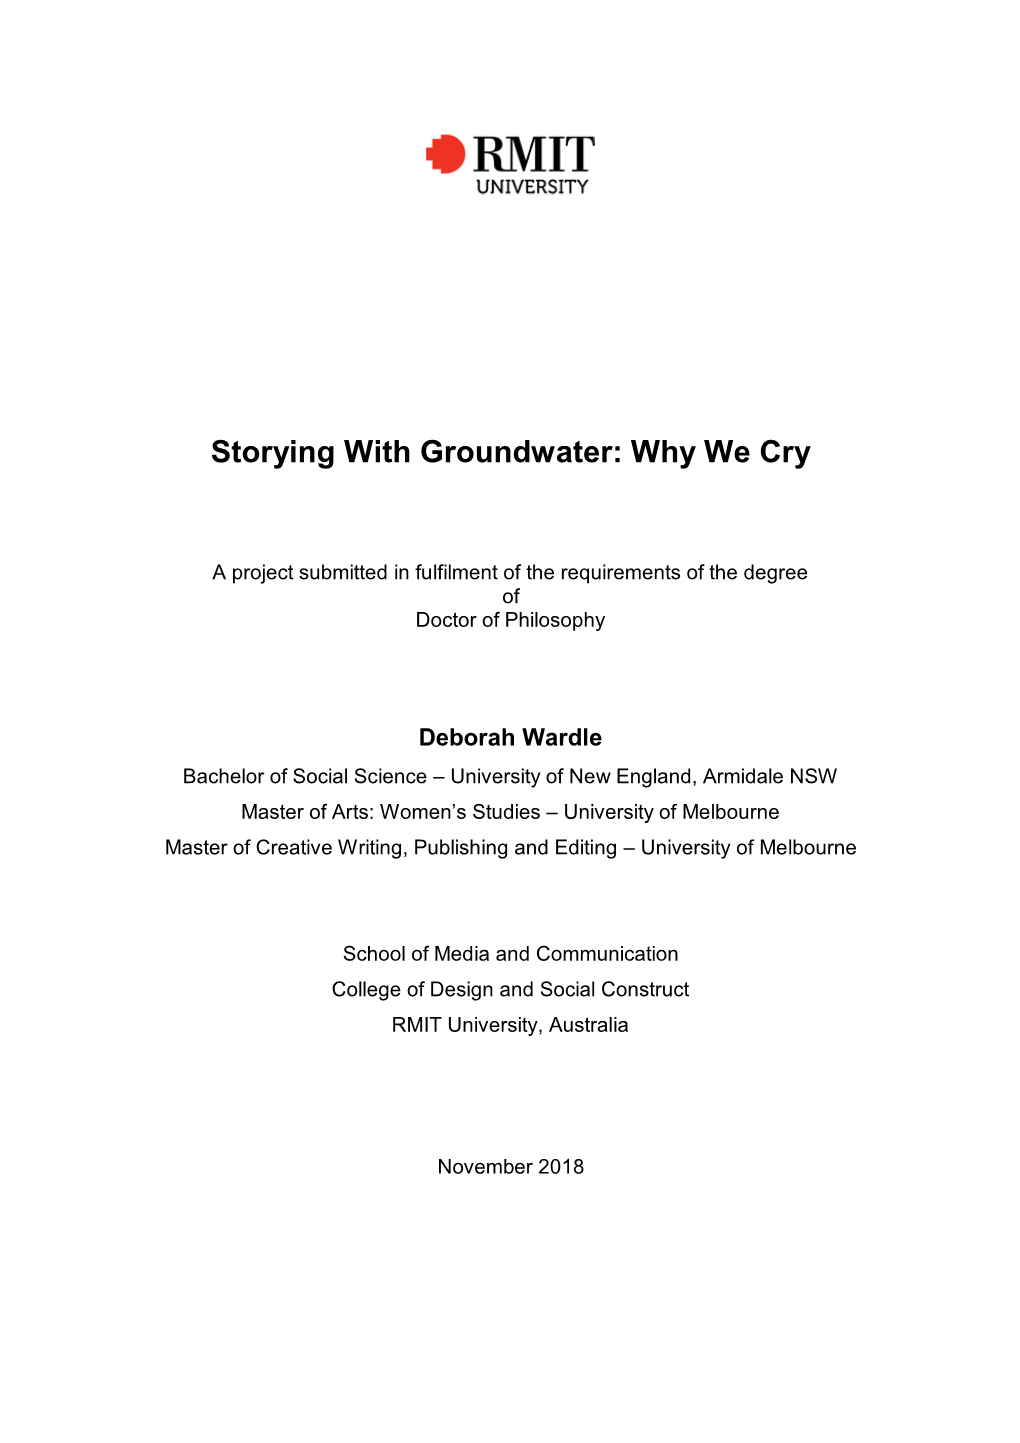 Storying with Groundwater: Why We Cry